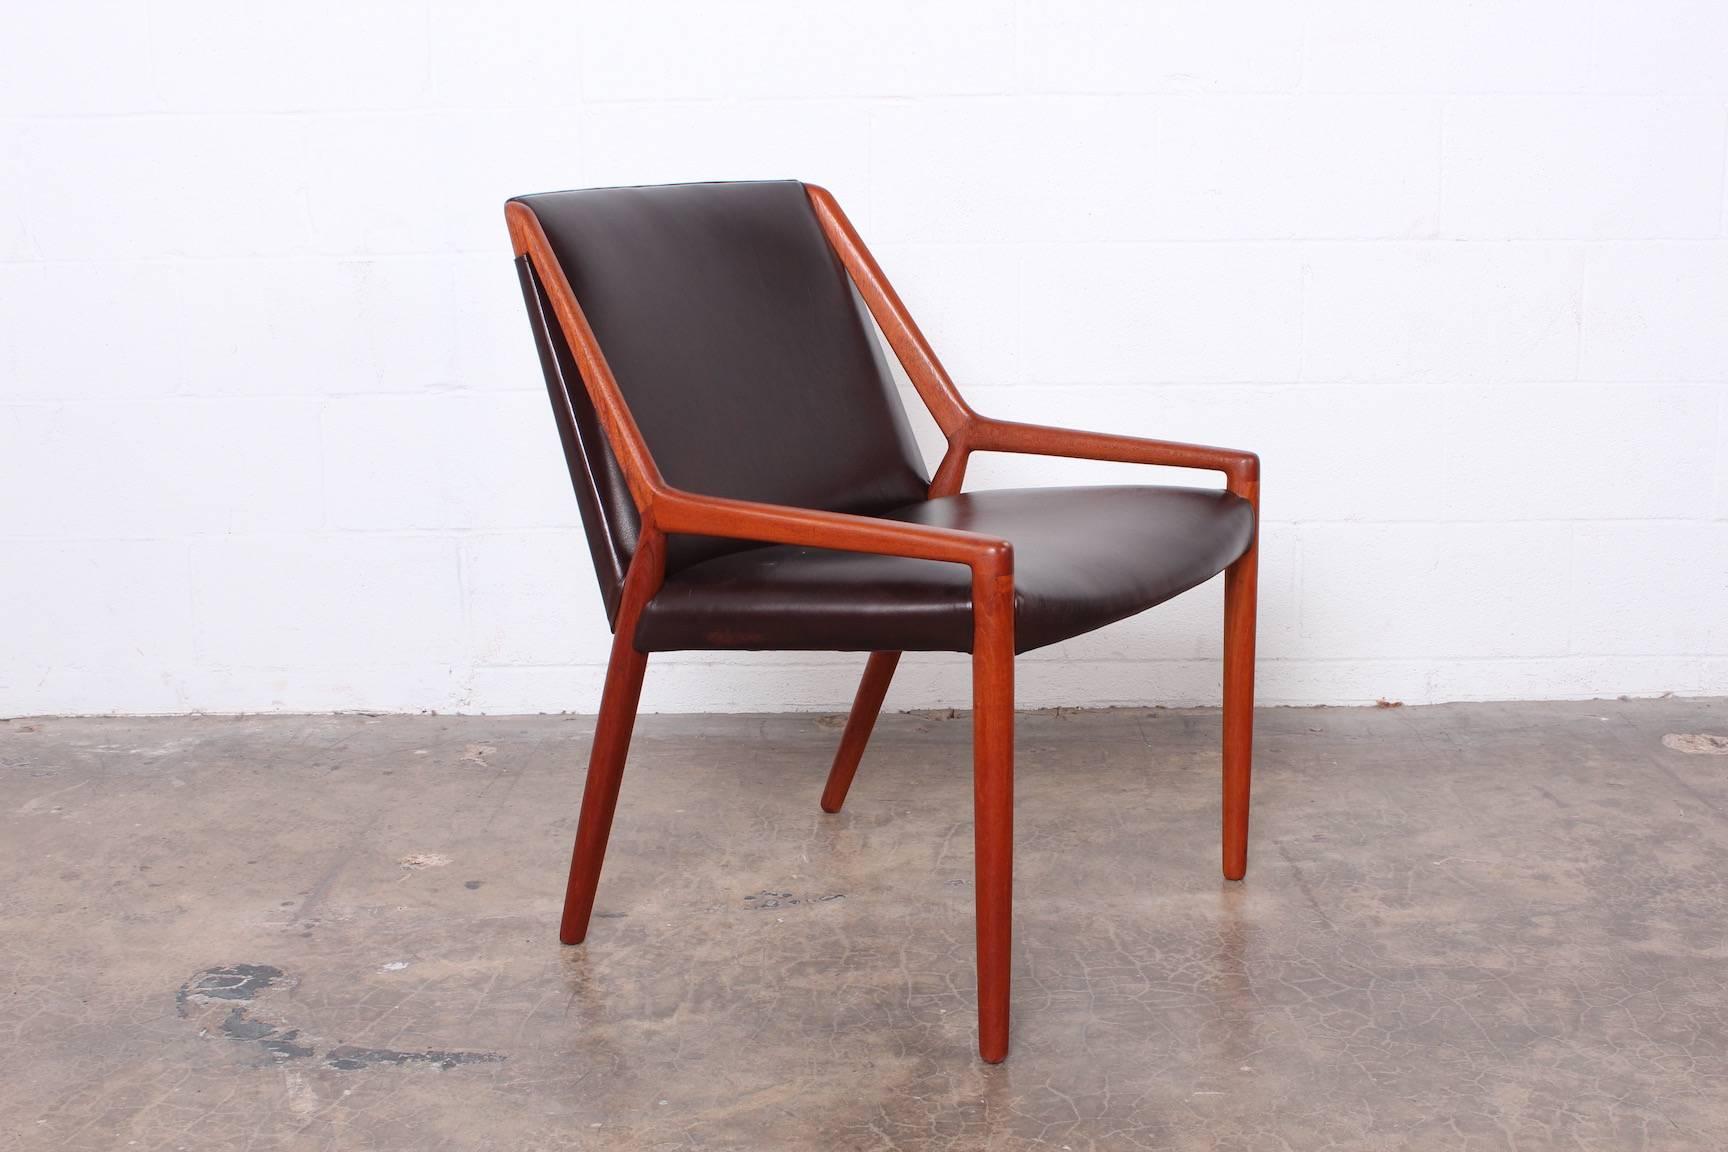 A rare teak and leather lounge chair by Ejner Larsen and Axel Bender Madsen for Willy Beck.